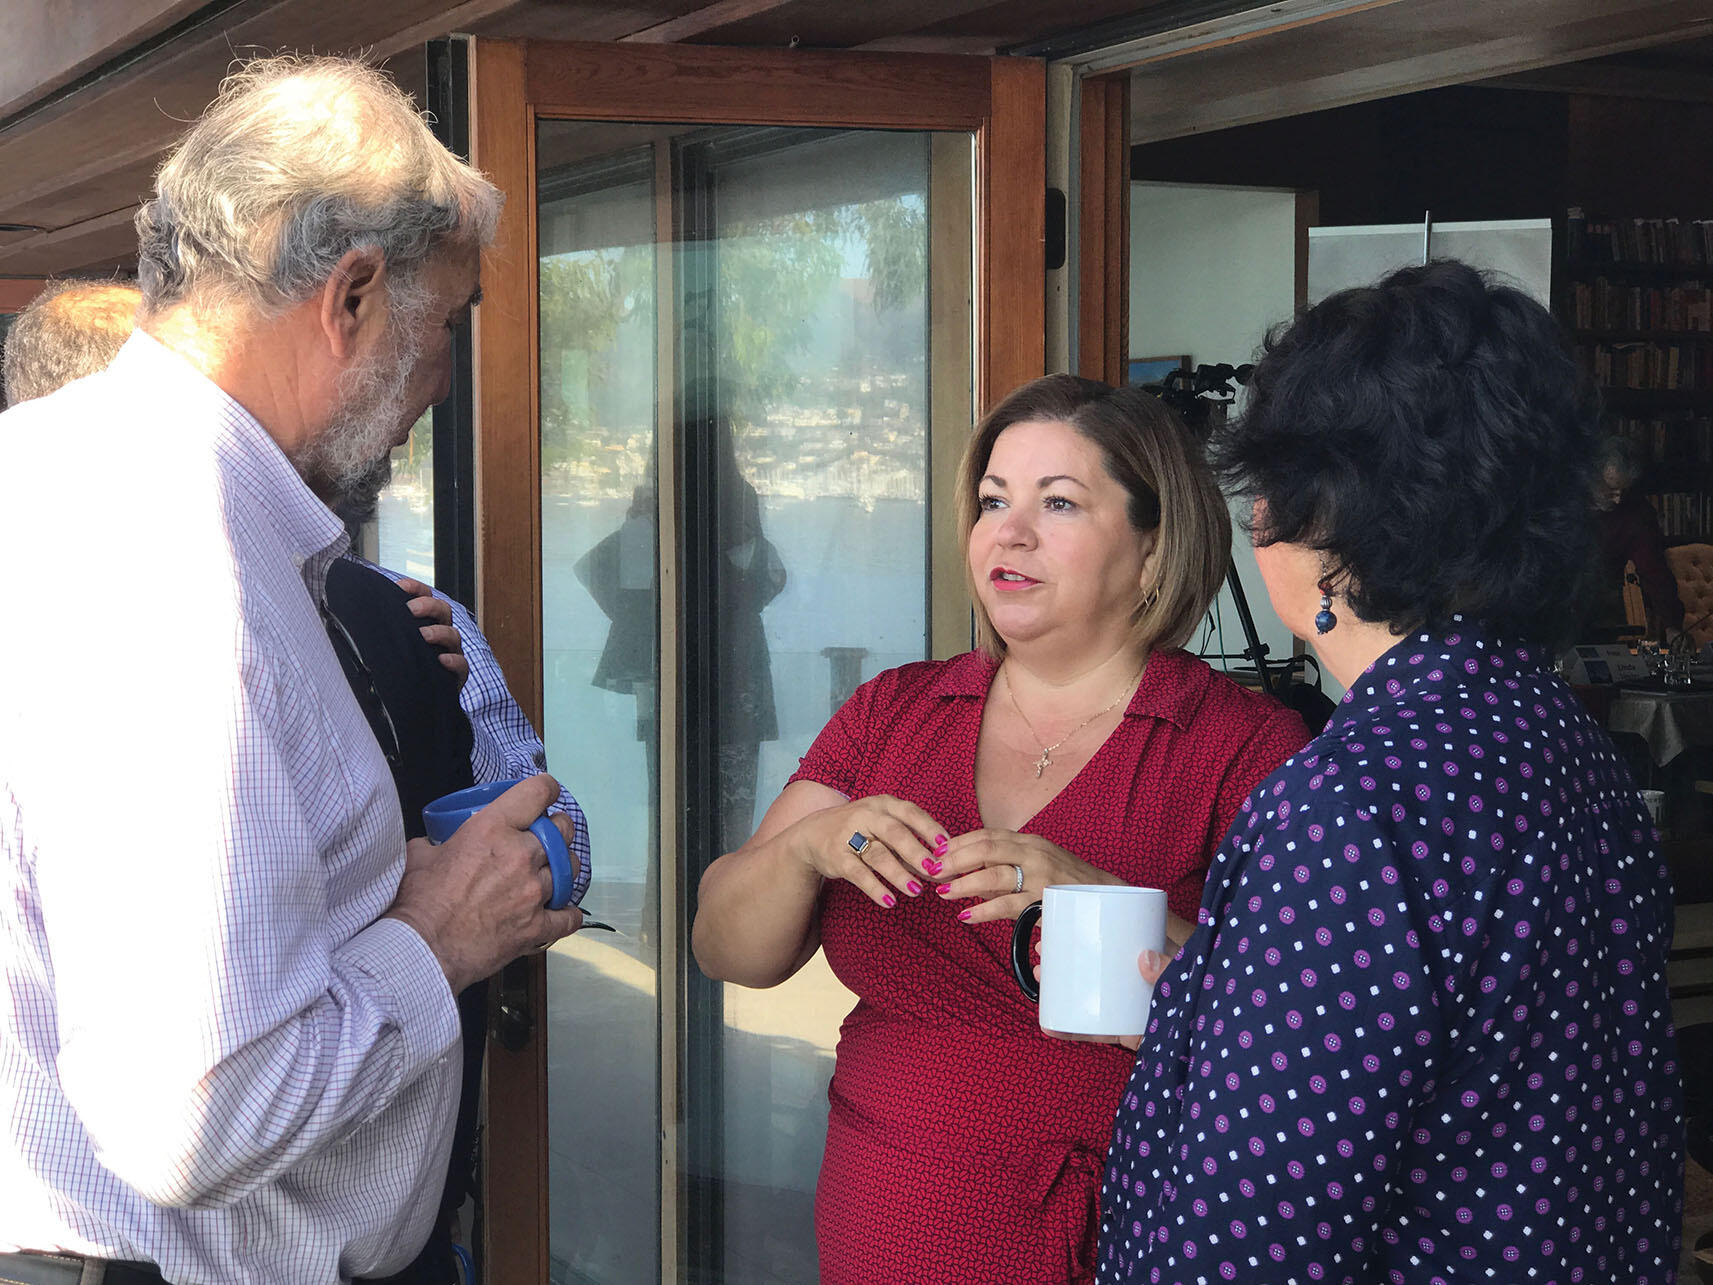 Linda Sánchez speaks with Steve Silberstein and Beatriz Manz at the Forum. (Photo by Perla Nation.)